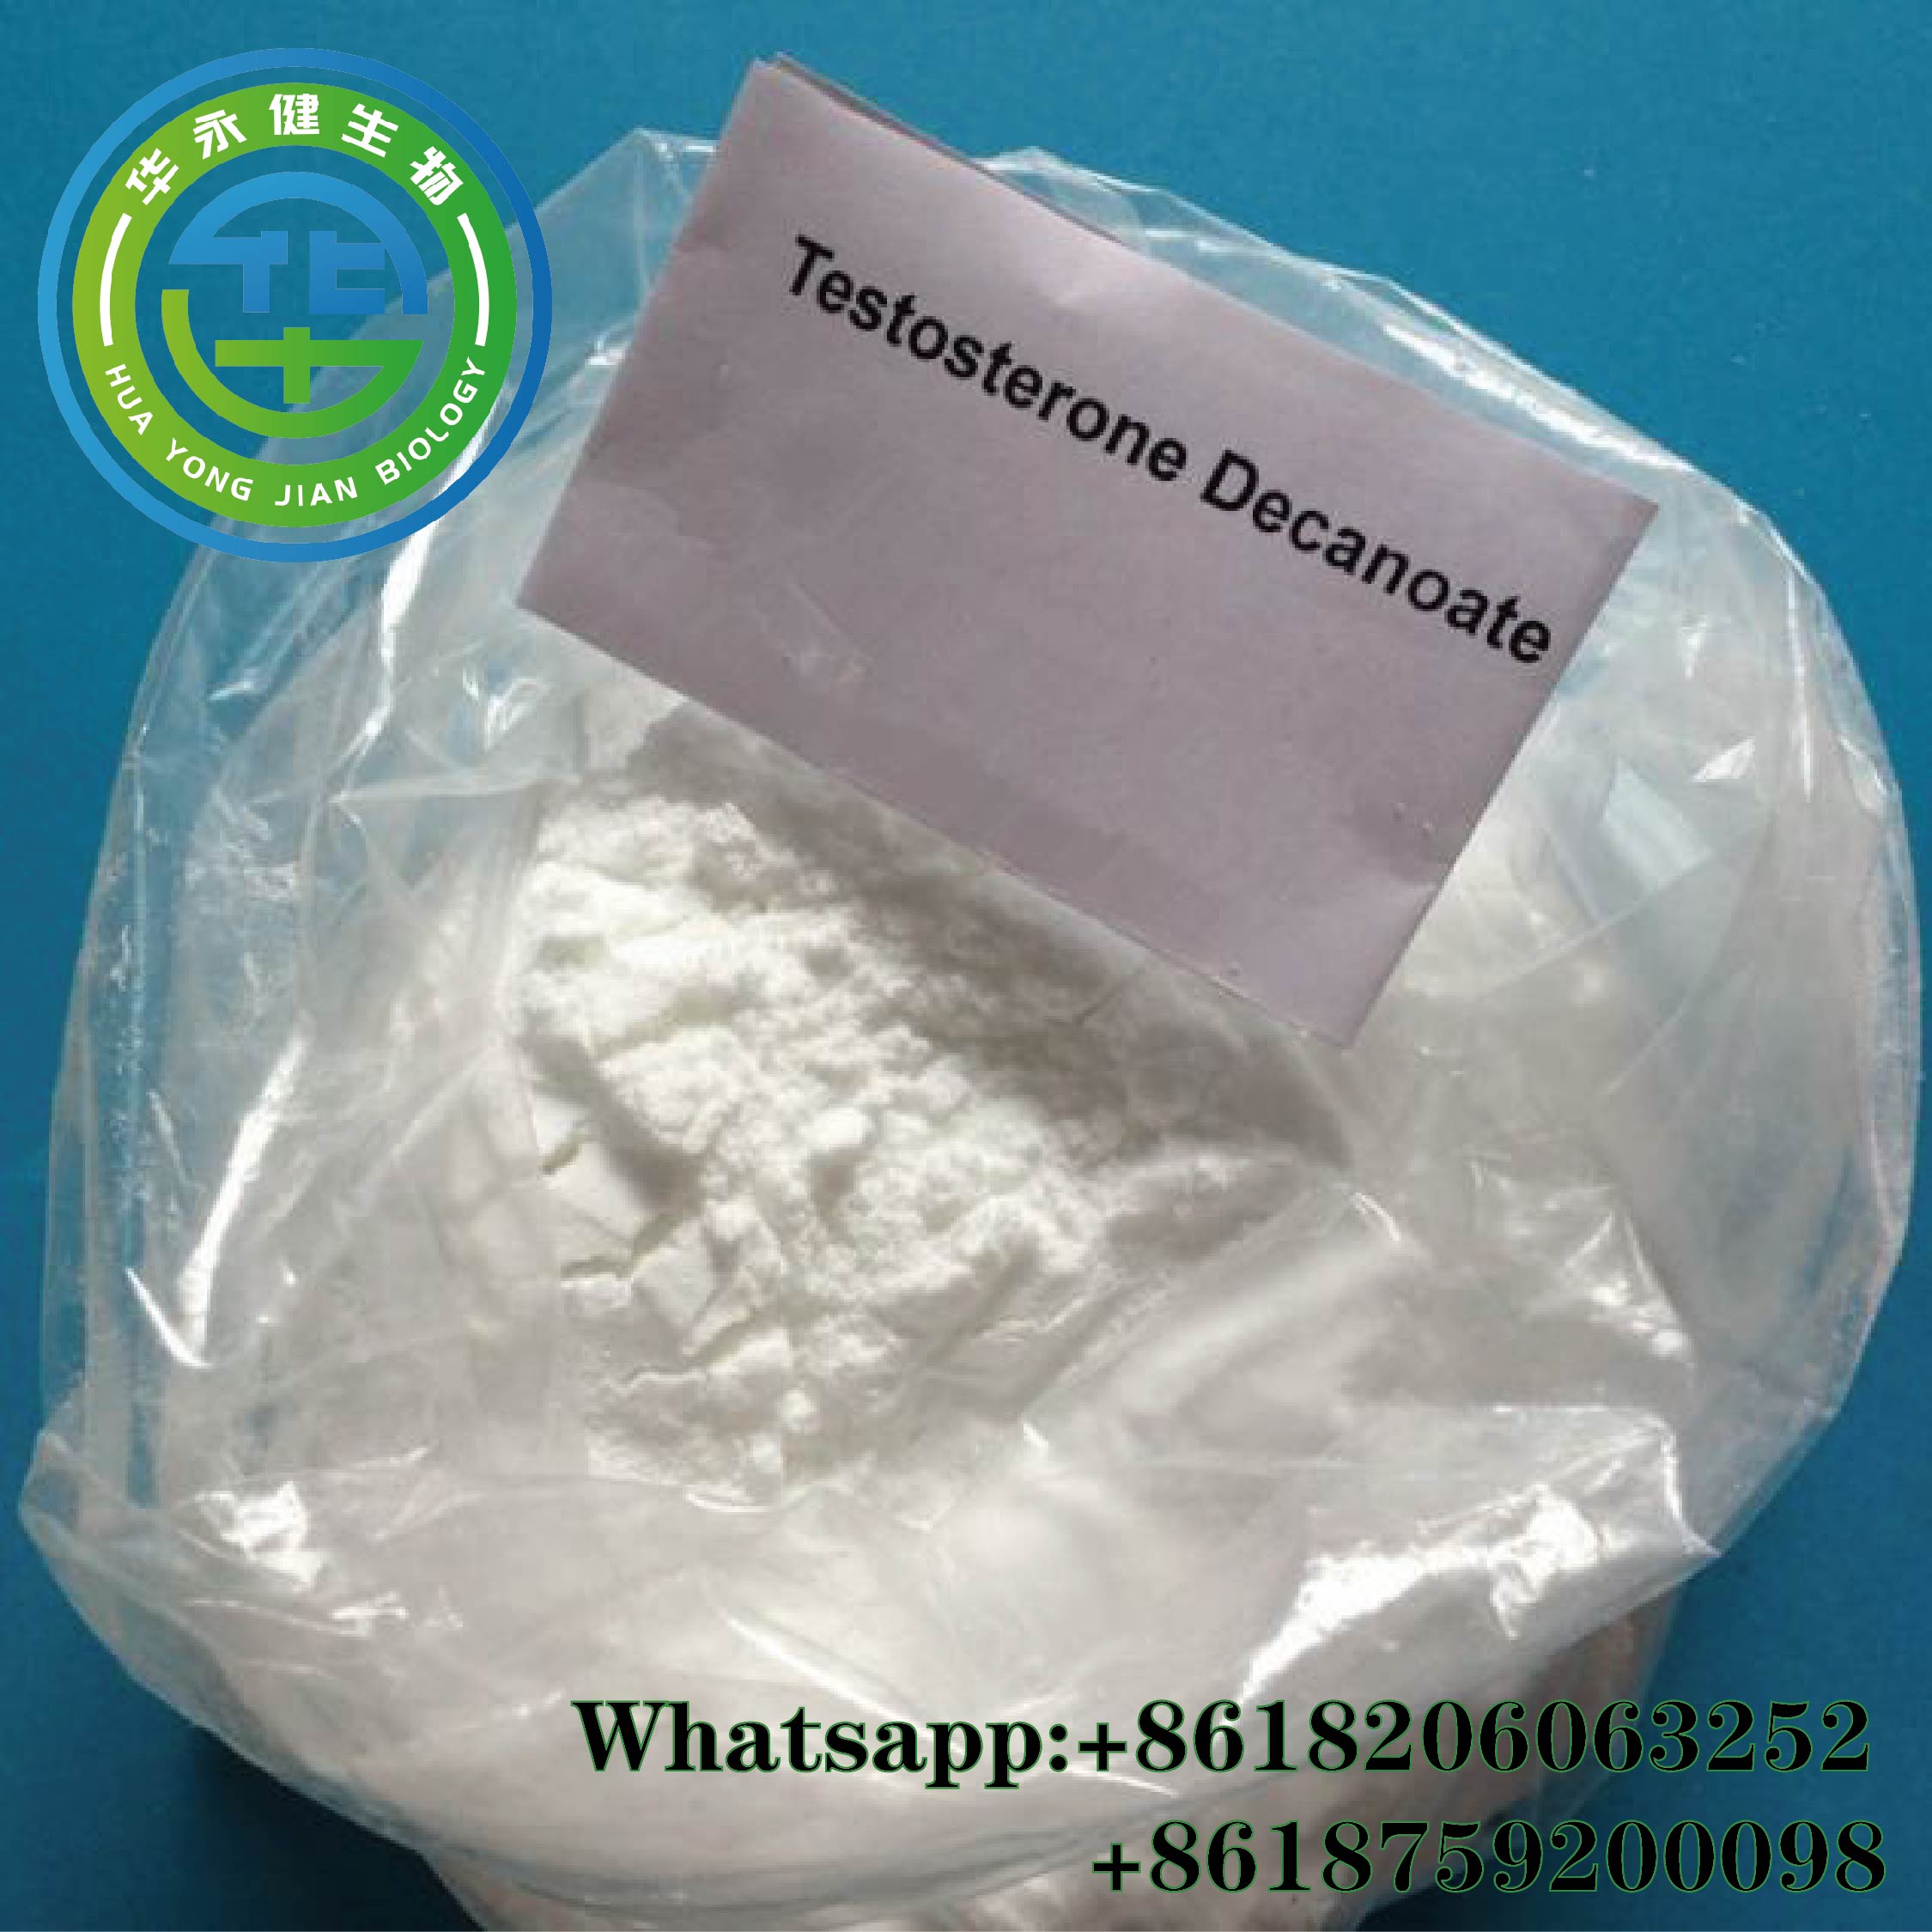 Testosterone Decanoate Powder Pharmaceutical Raw Powder Anabolic Steroid  Test D CAS: 5721-91-5 for Musclebuilding